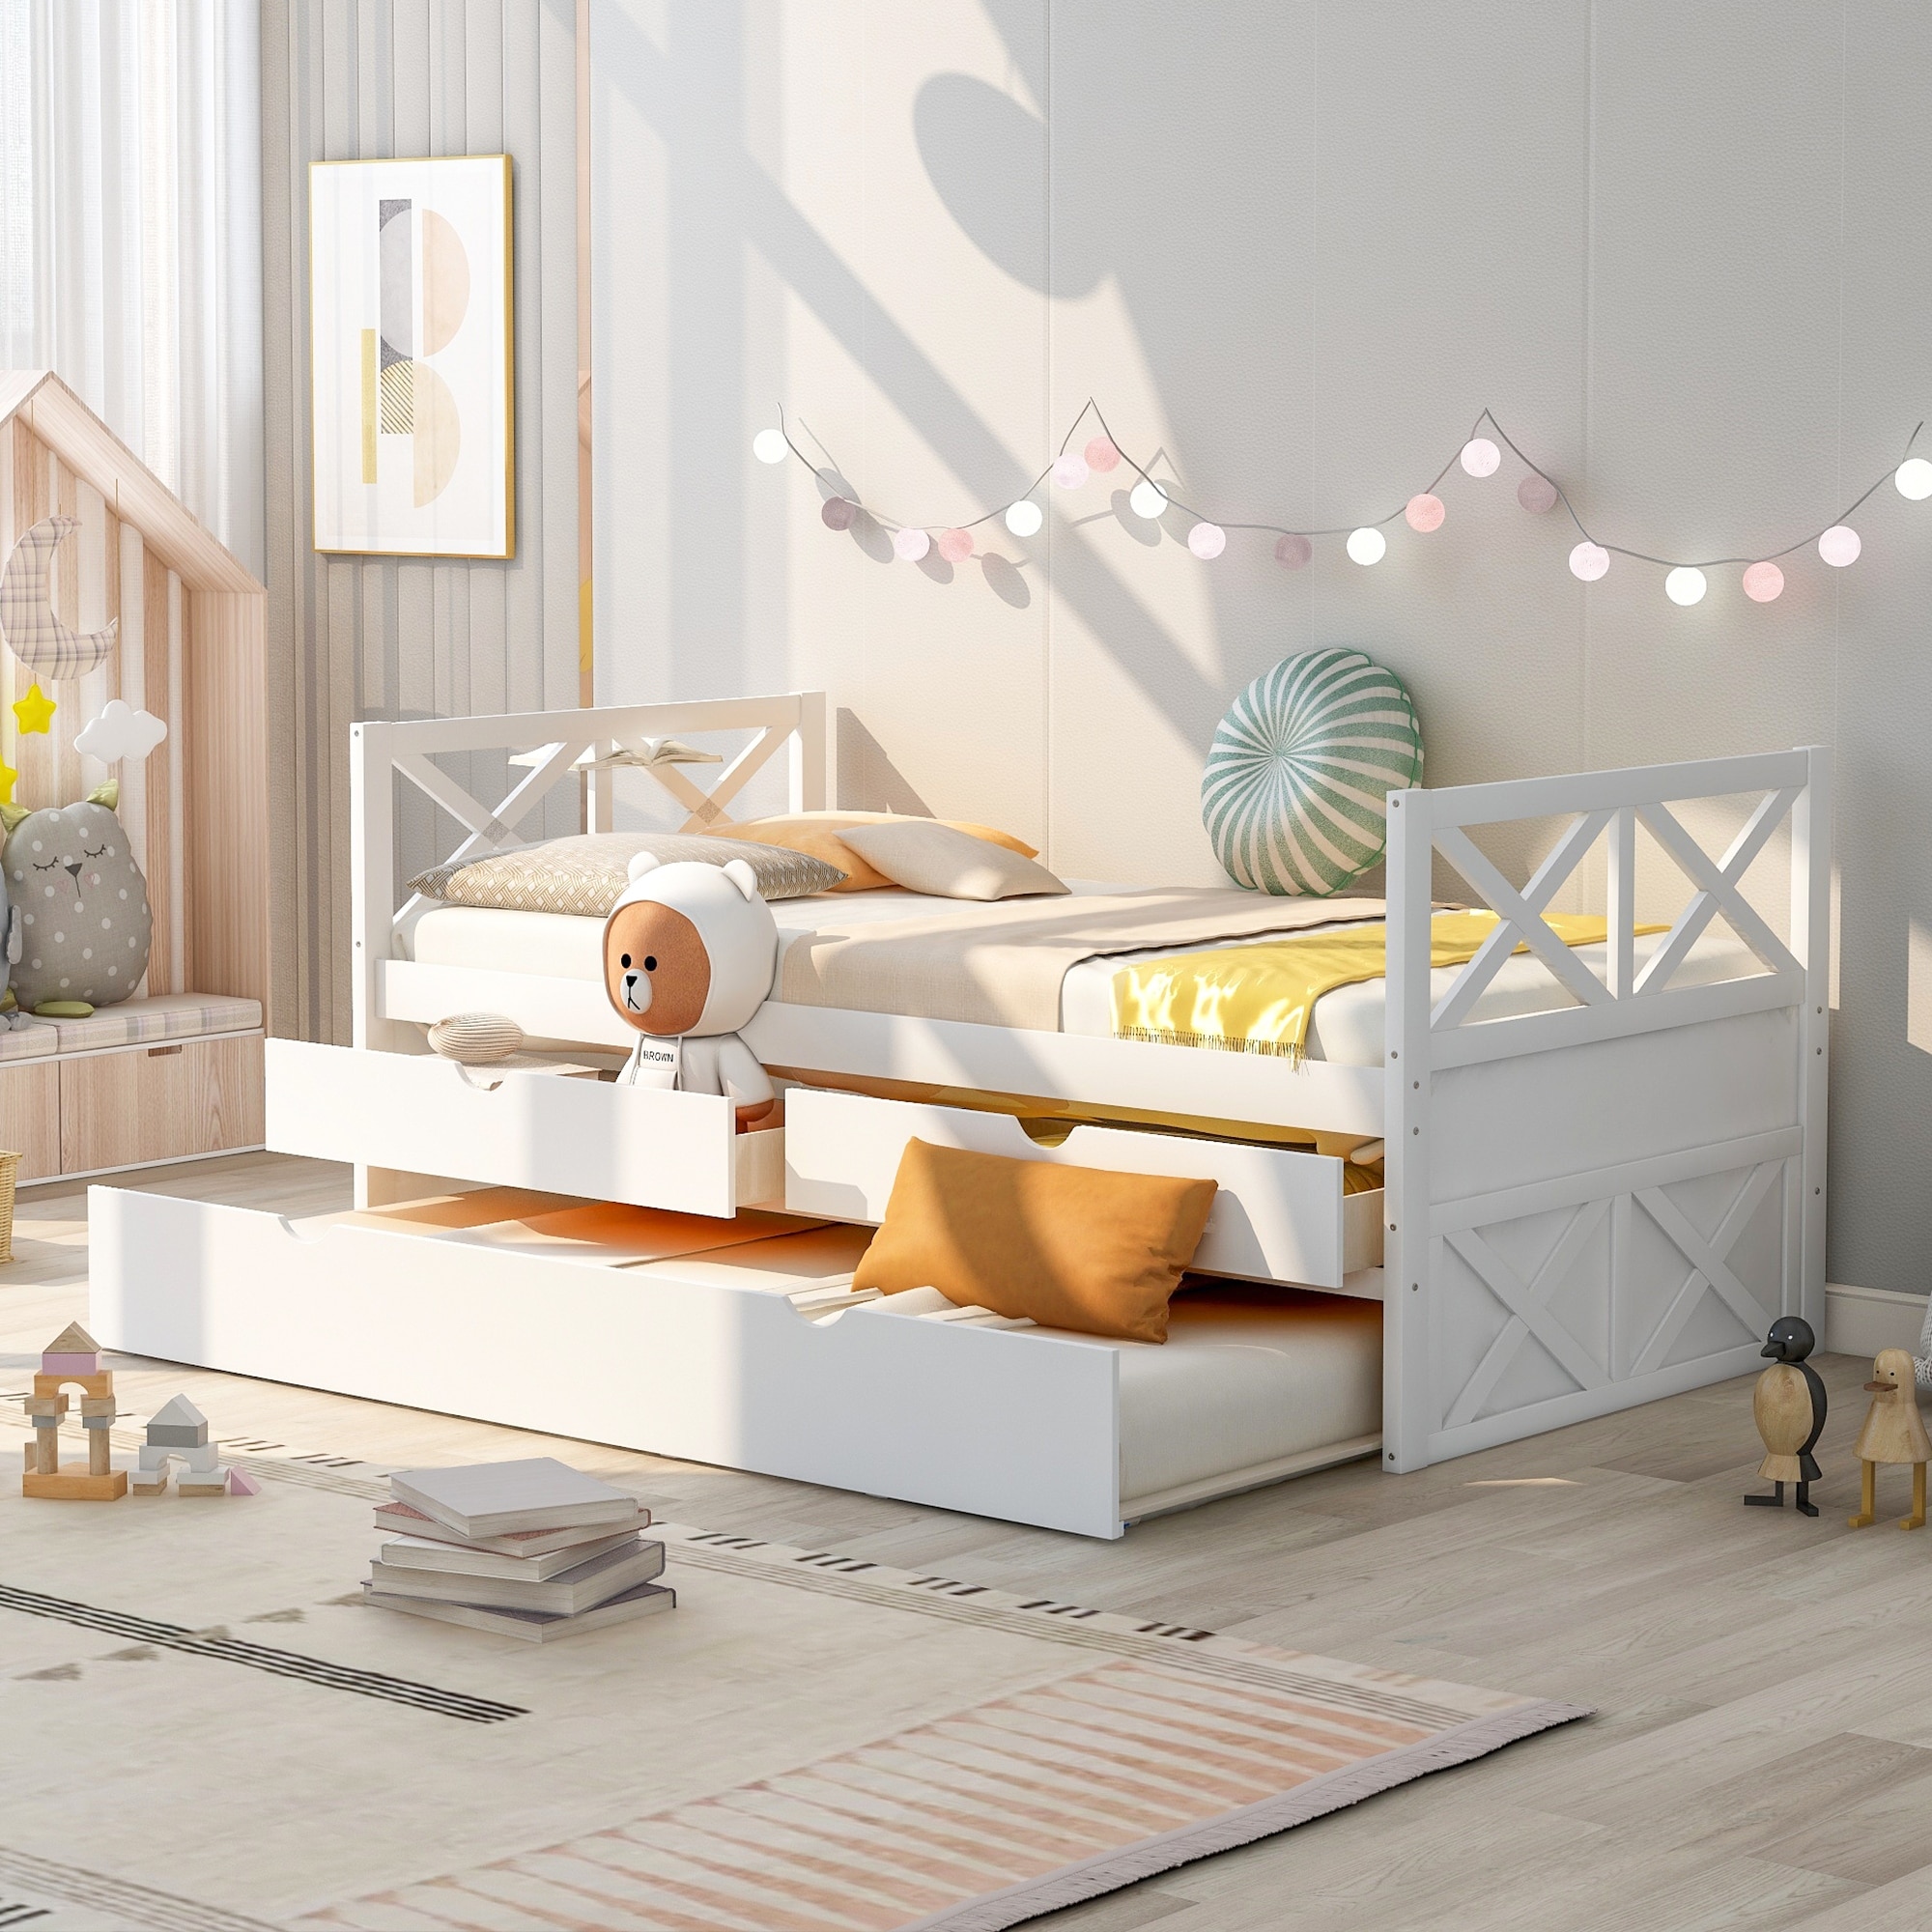 Rustic Style Twin Daybed With Drawers&trundle  Multi-functional Solid Pine Wood Bedframe For Kids Teens Bedroom Guestroom  White